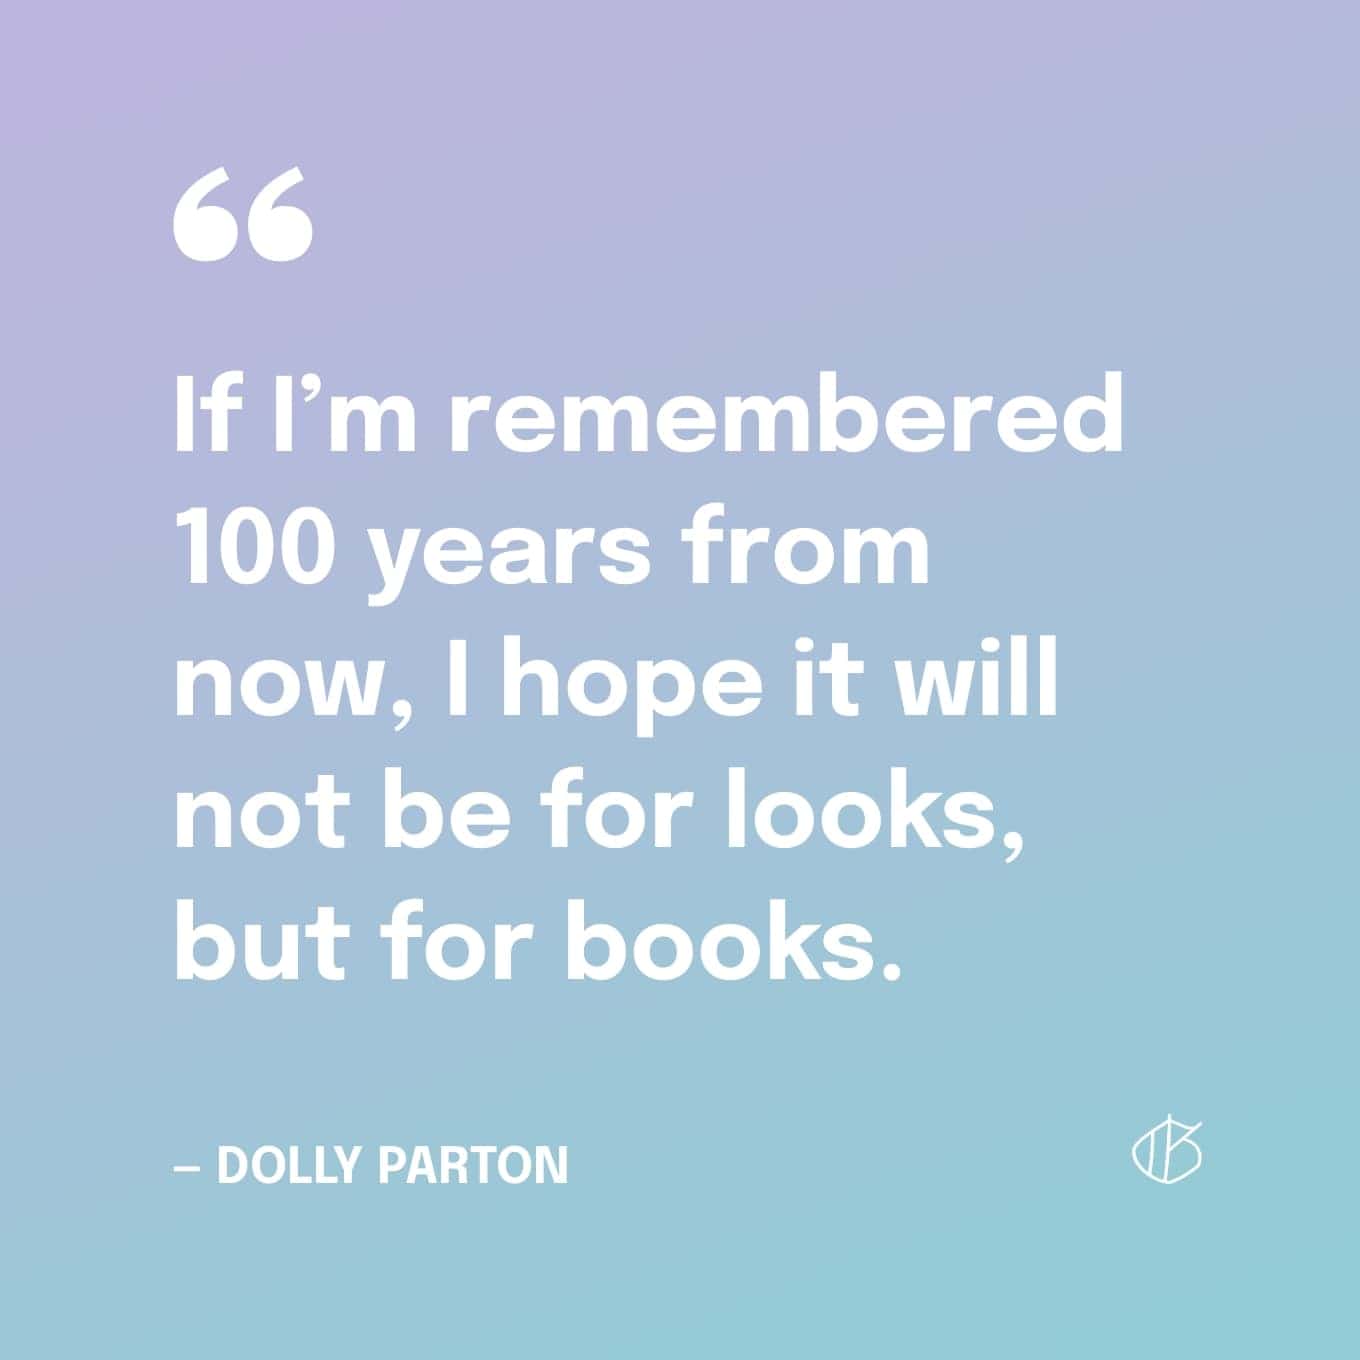 Dolly Parton Quote Wallpaper: If I’m remembered 100 years from now, I hope it will not be for looks, but for books.